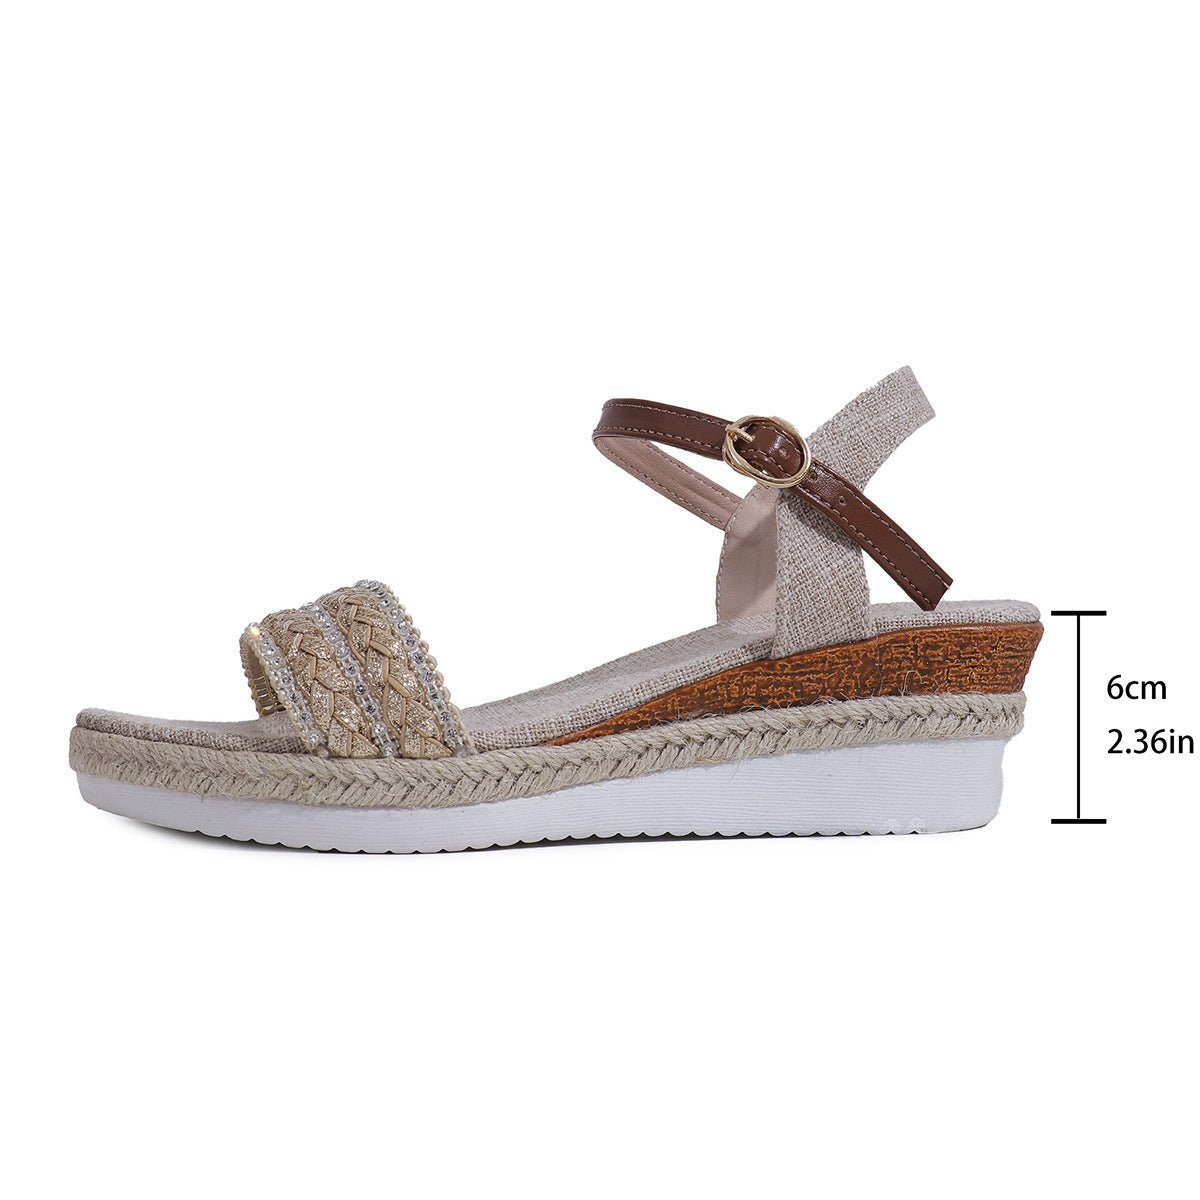 Ethnic Style One Strap Sandals Platform Wedge Buckle Plus Size Shoes & Bags